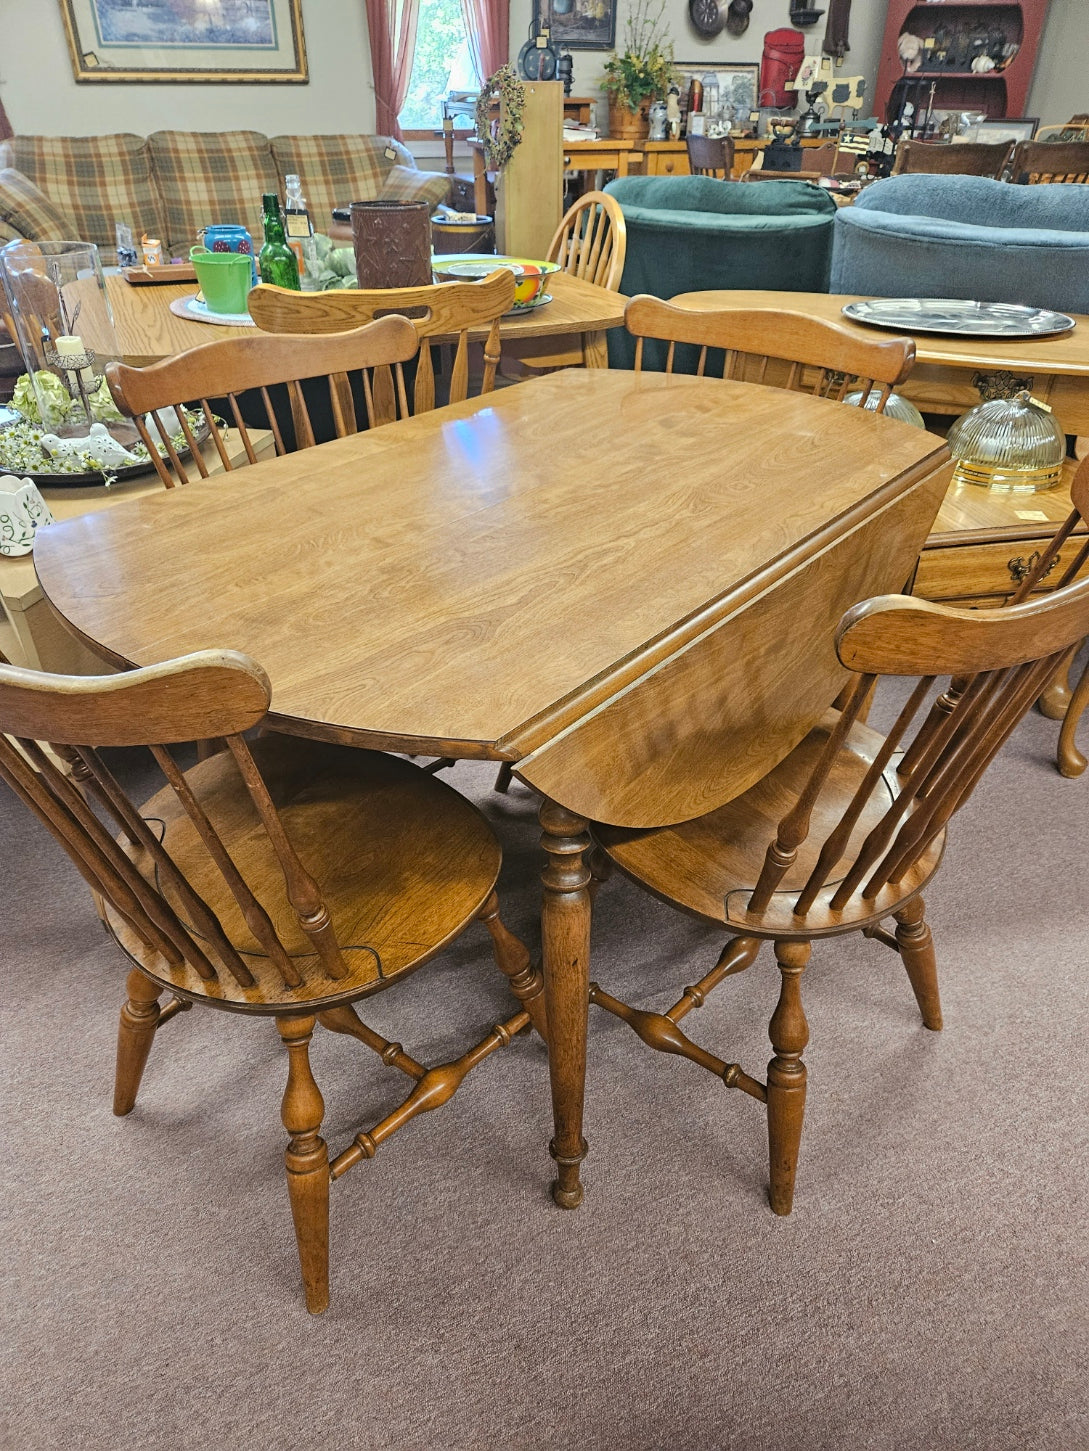 Double Drop Leaf Table w/ 4 Chairs